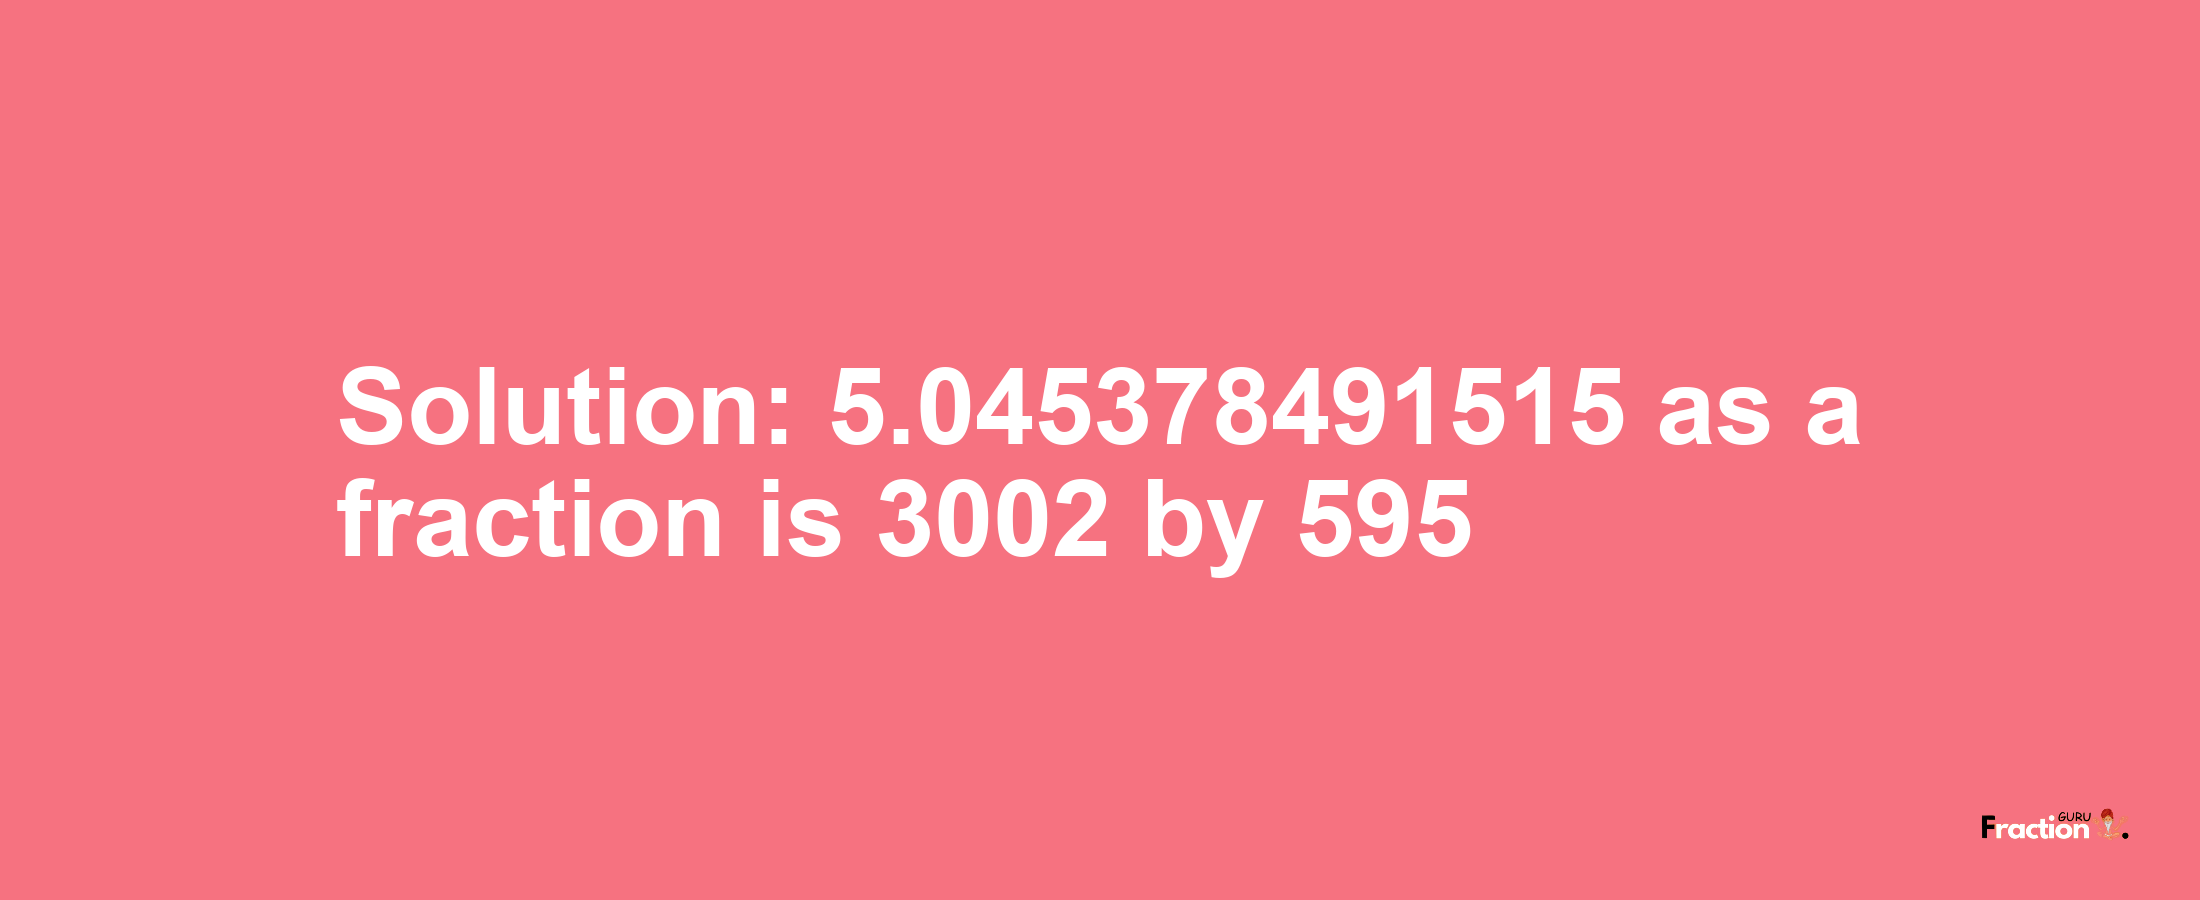 Solution:5.045378491515 as a fraction is 3002/595